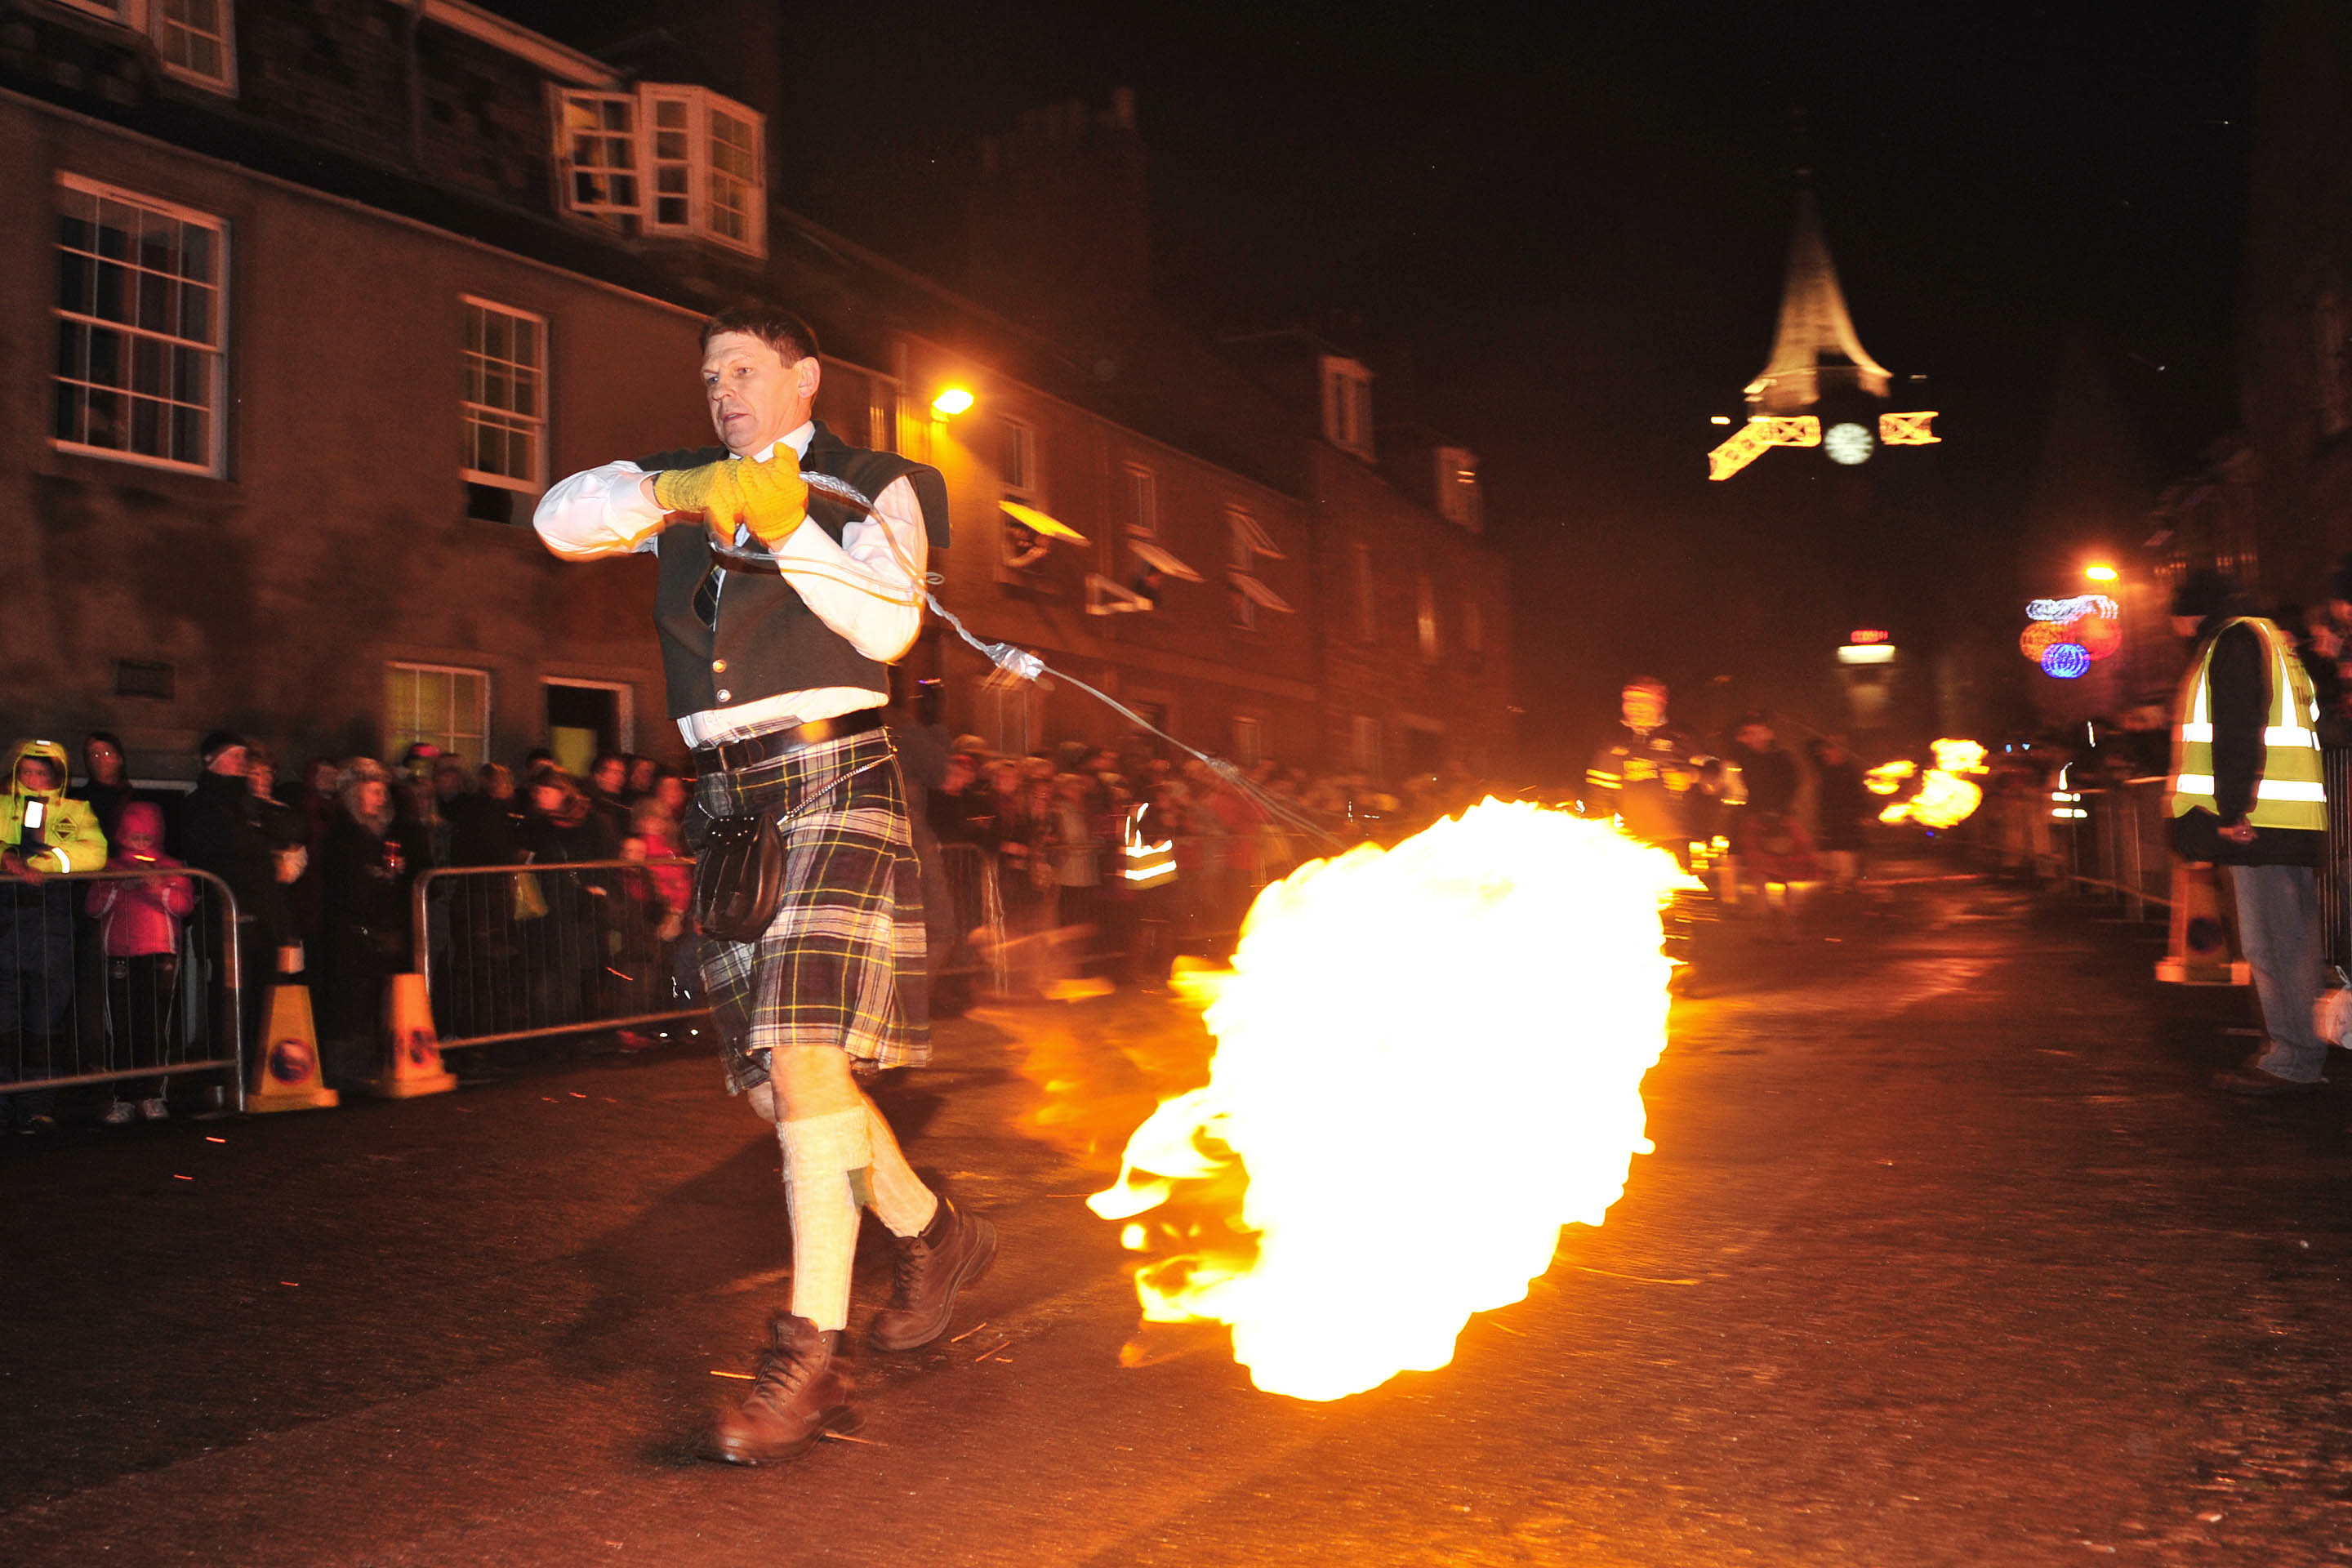 The Stonehaven fireballs parade is one of Scotland's most famous Hogmanay events.